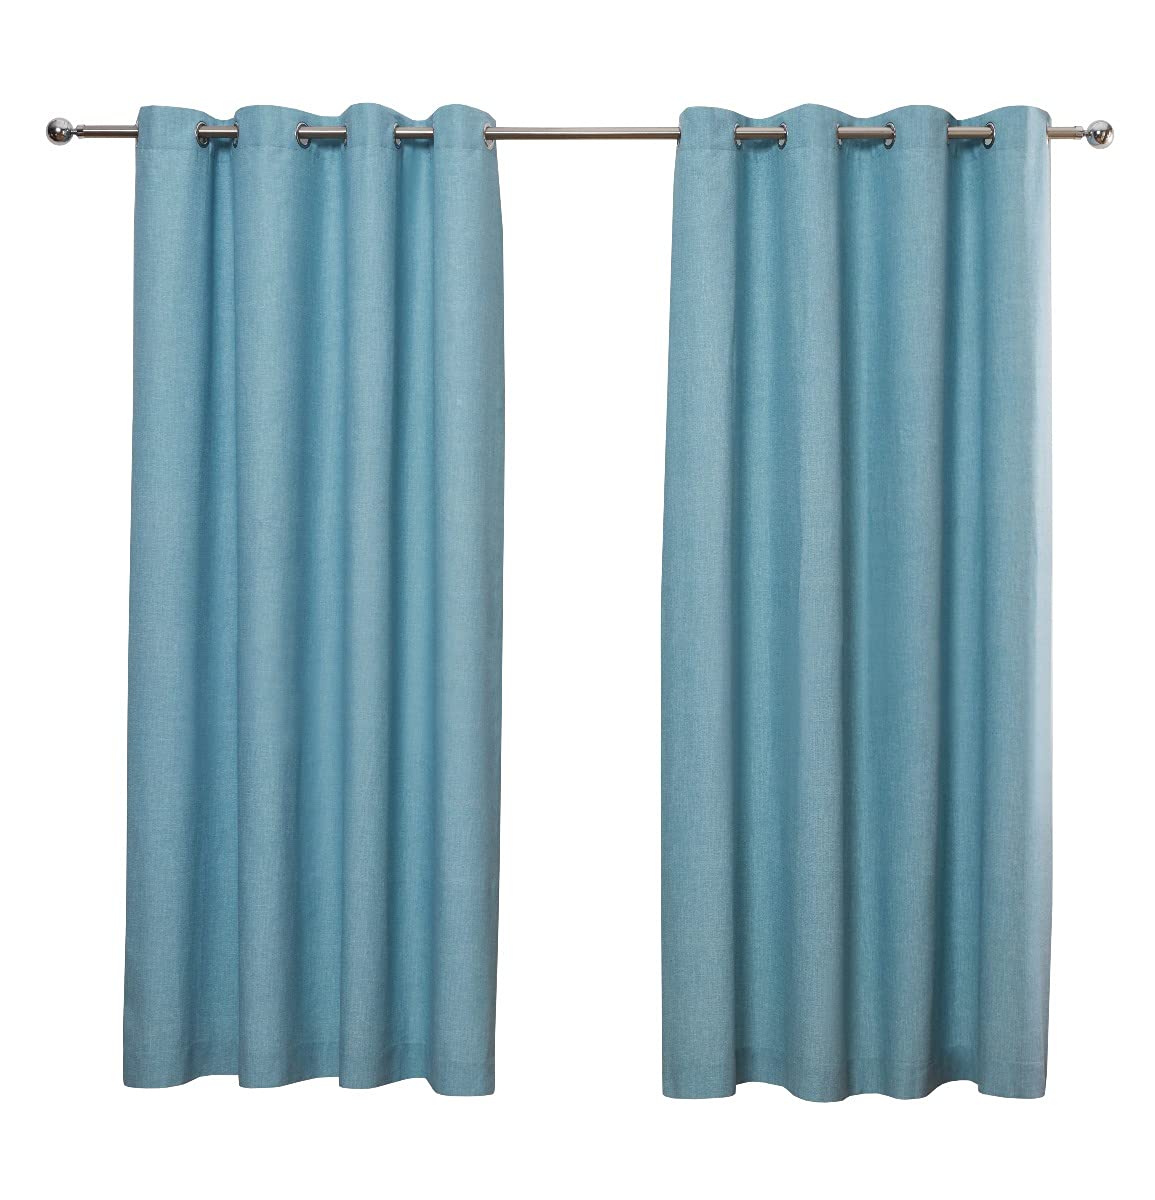 Textured Print - Eyelet Lined Curtains